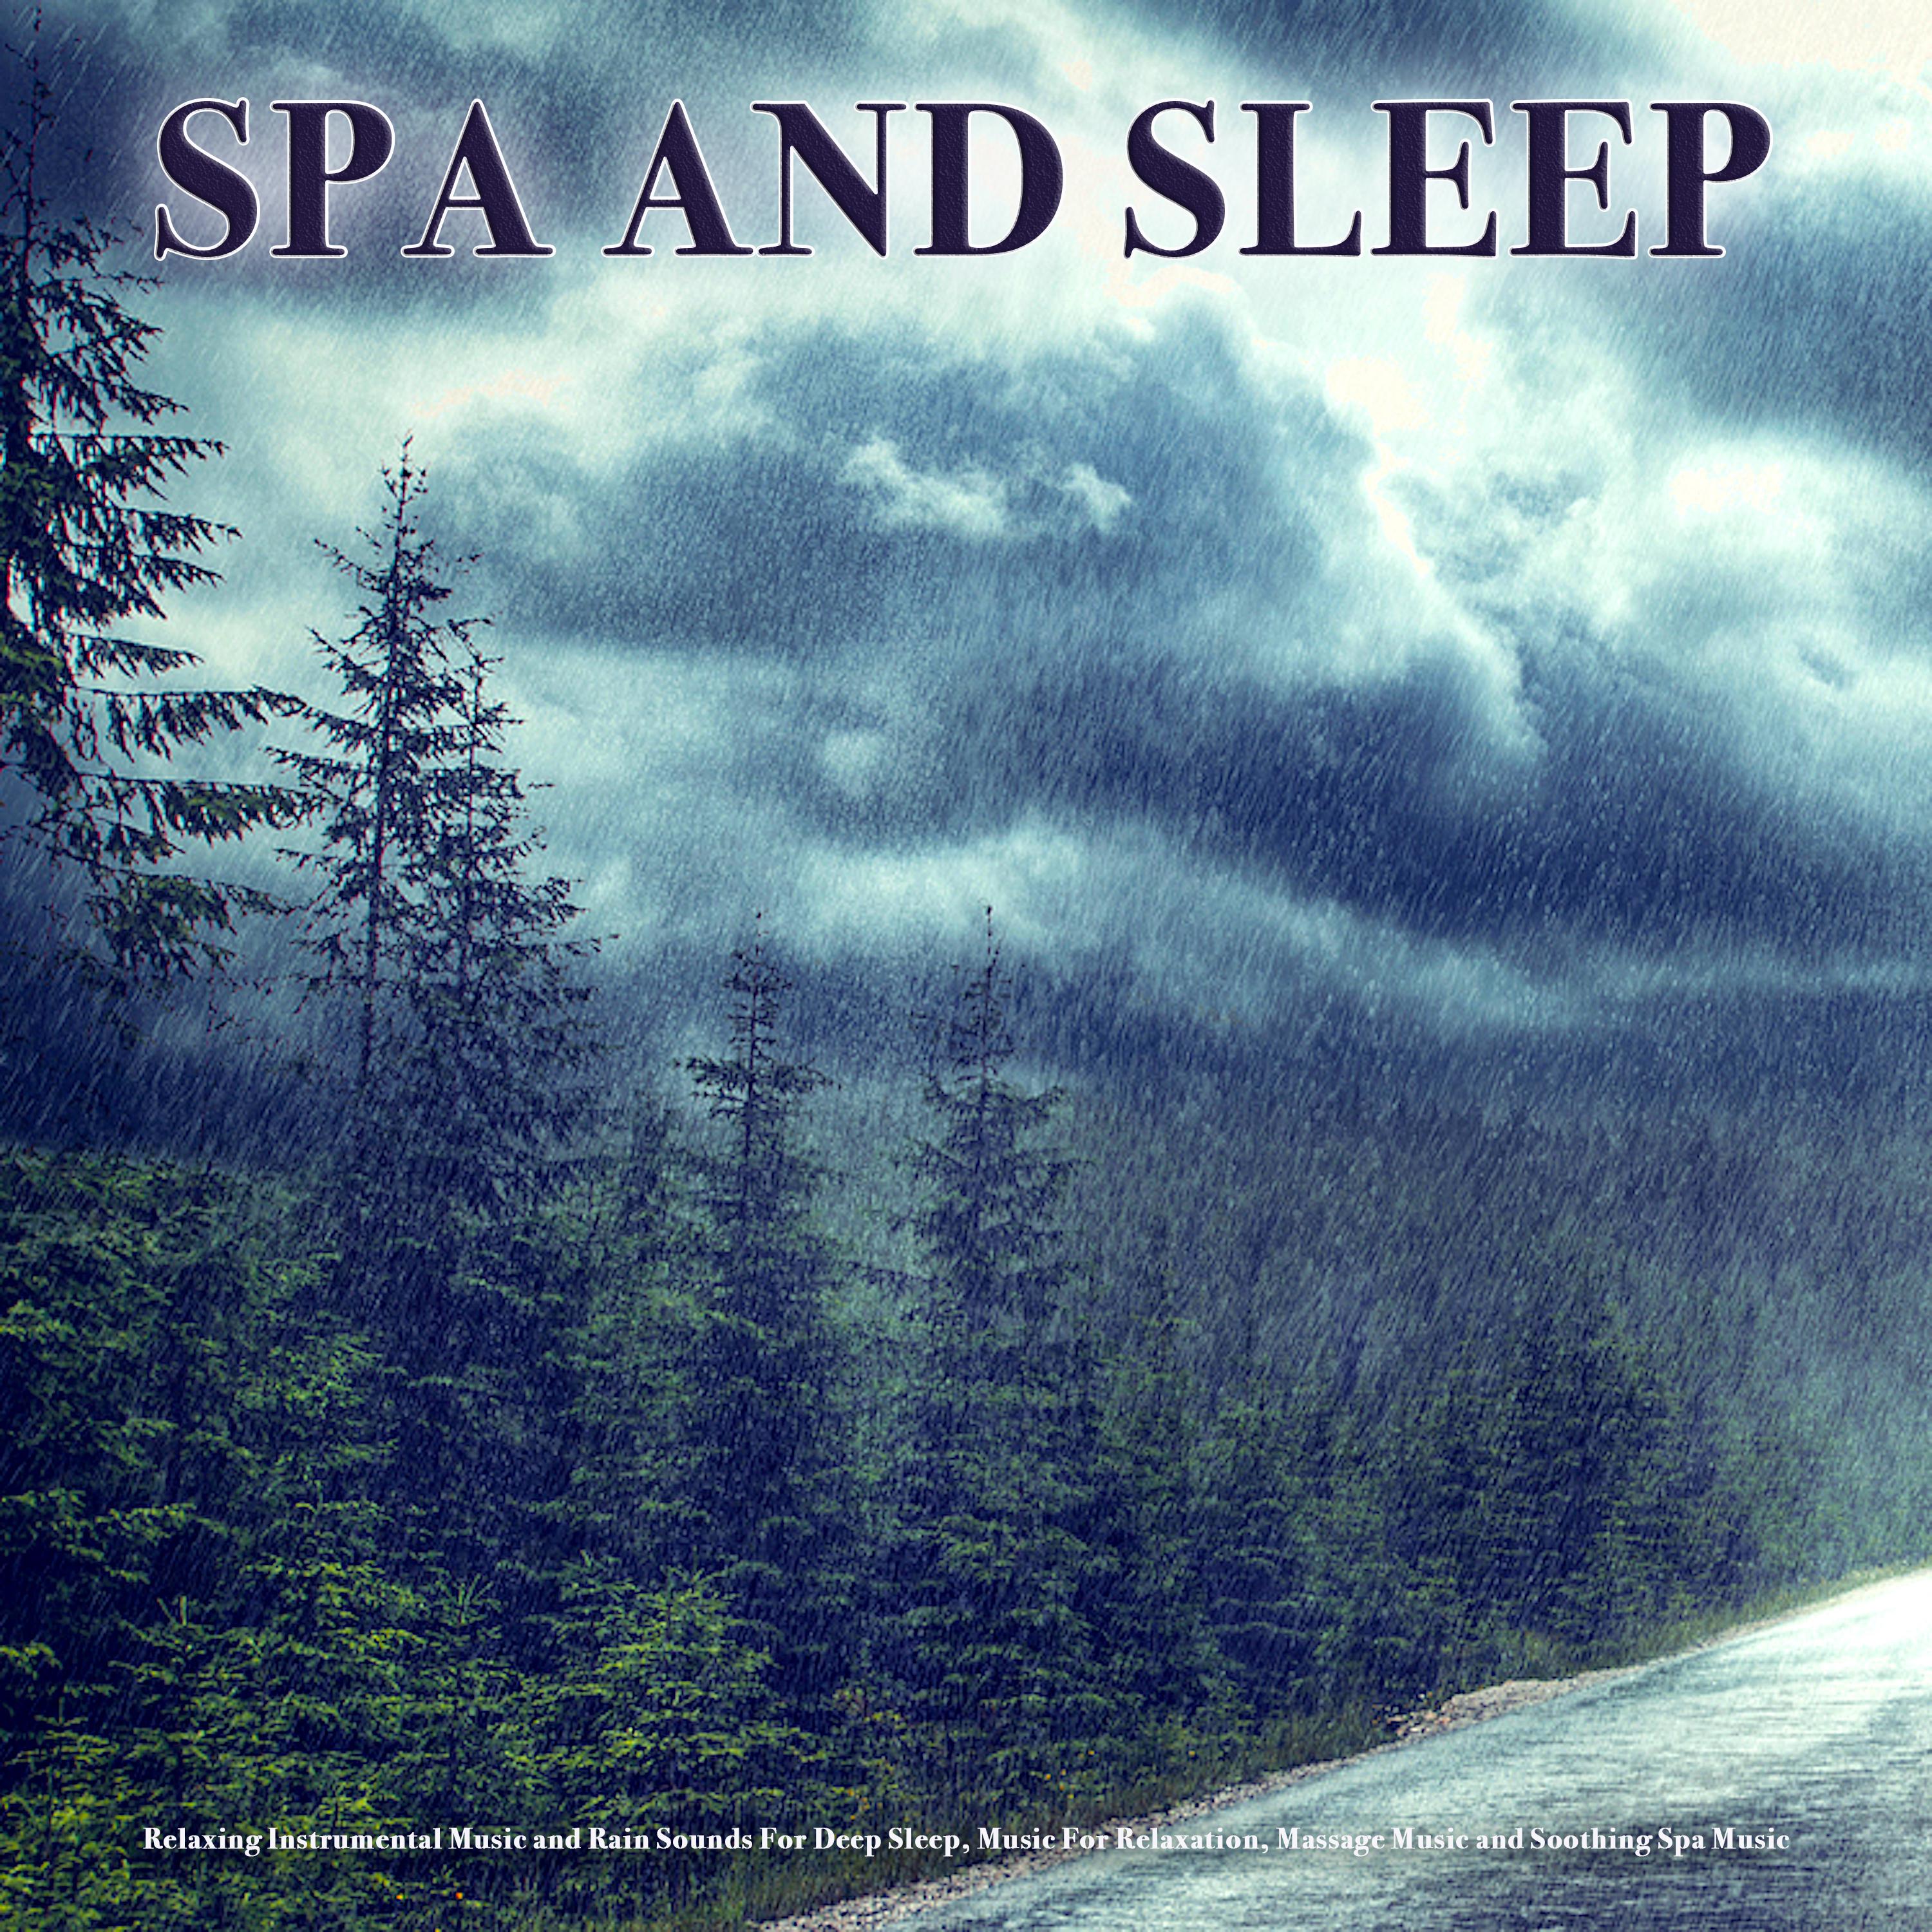 Spa and Sleep: Relaxing Instrumental Music and Rain Sounds For Deep Sleep, Music For Relaxation, Massage Music and Soothing Spa Music